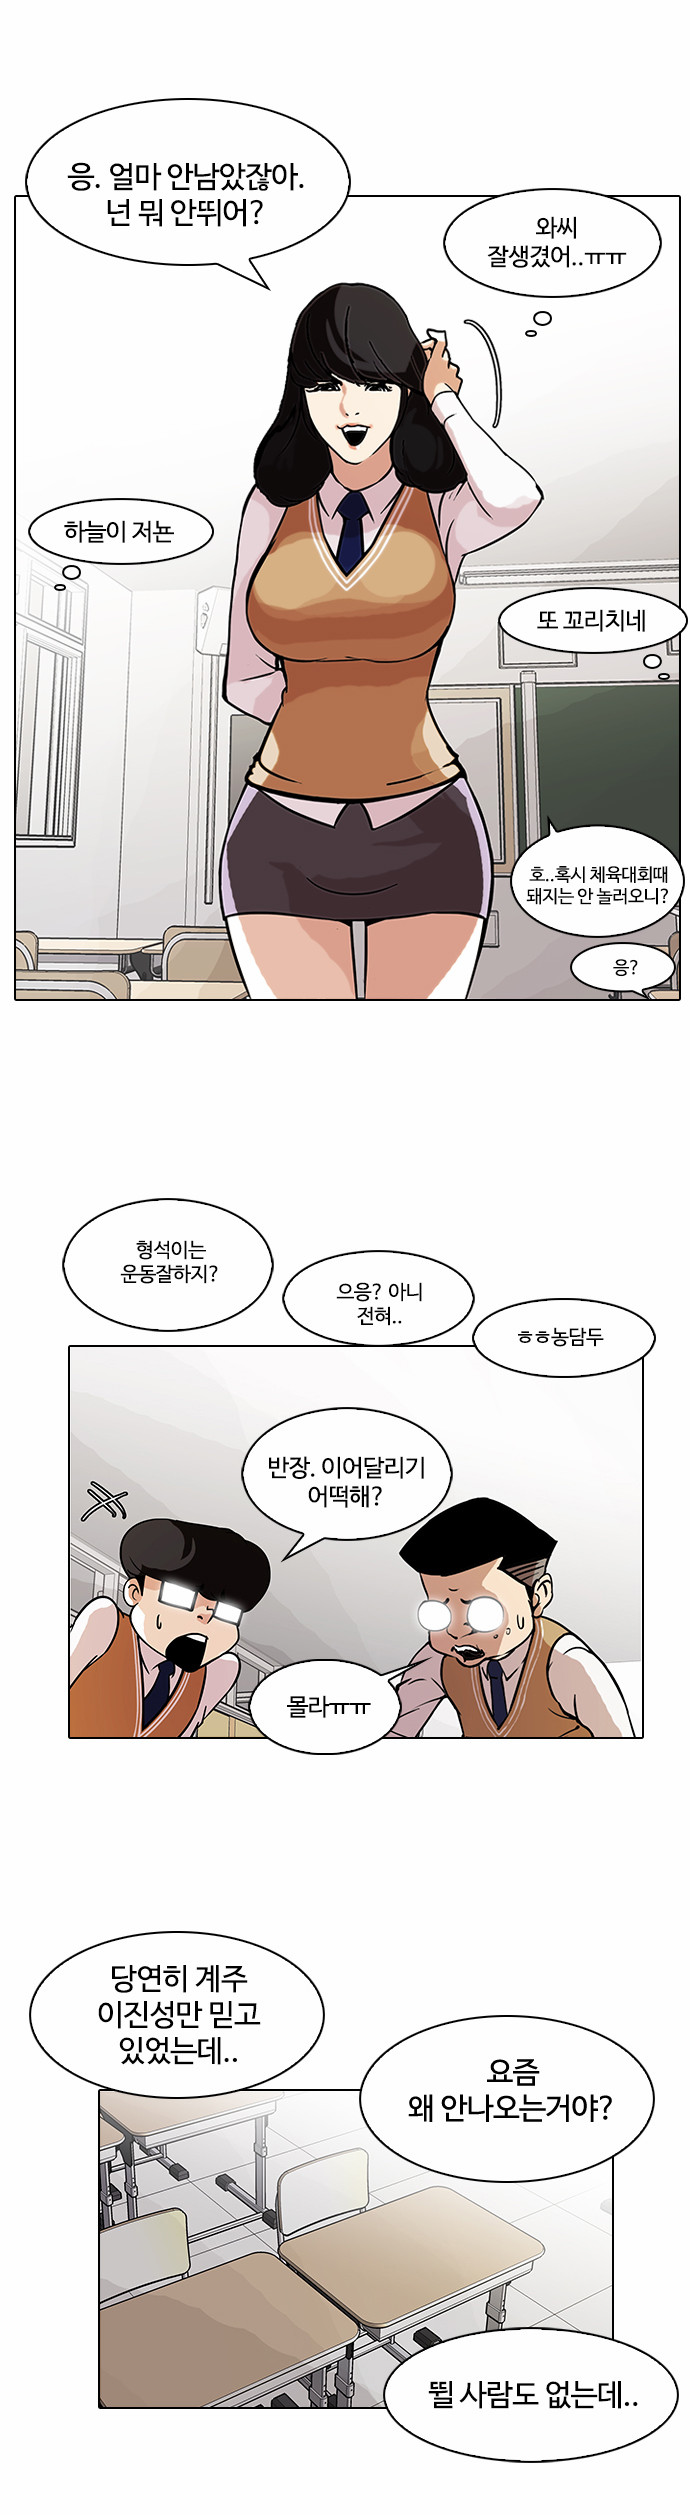 Lookism - Chapter 91 - Page 2